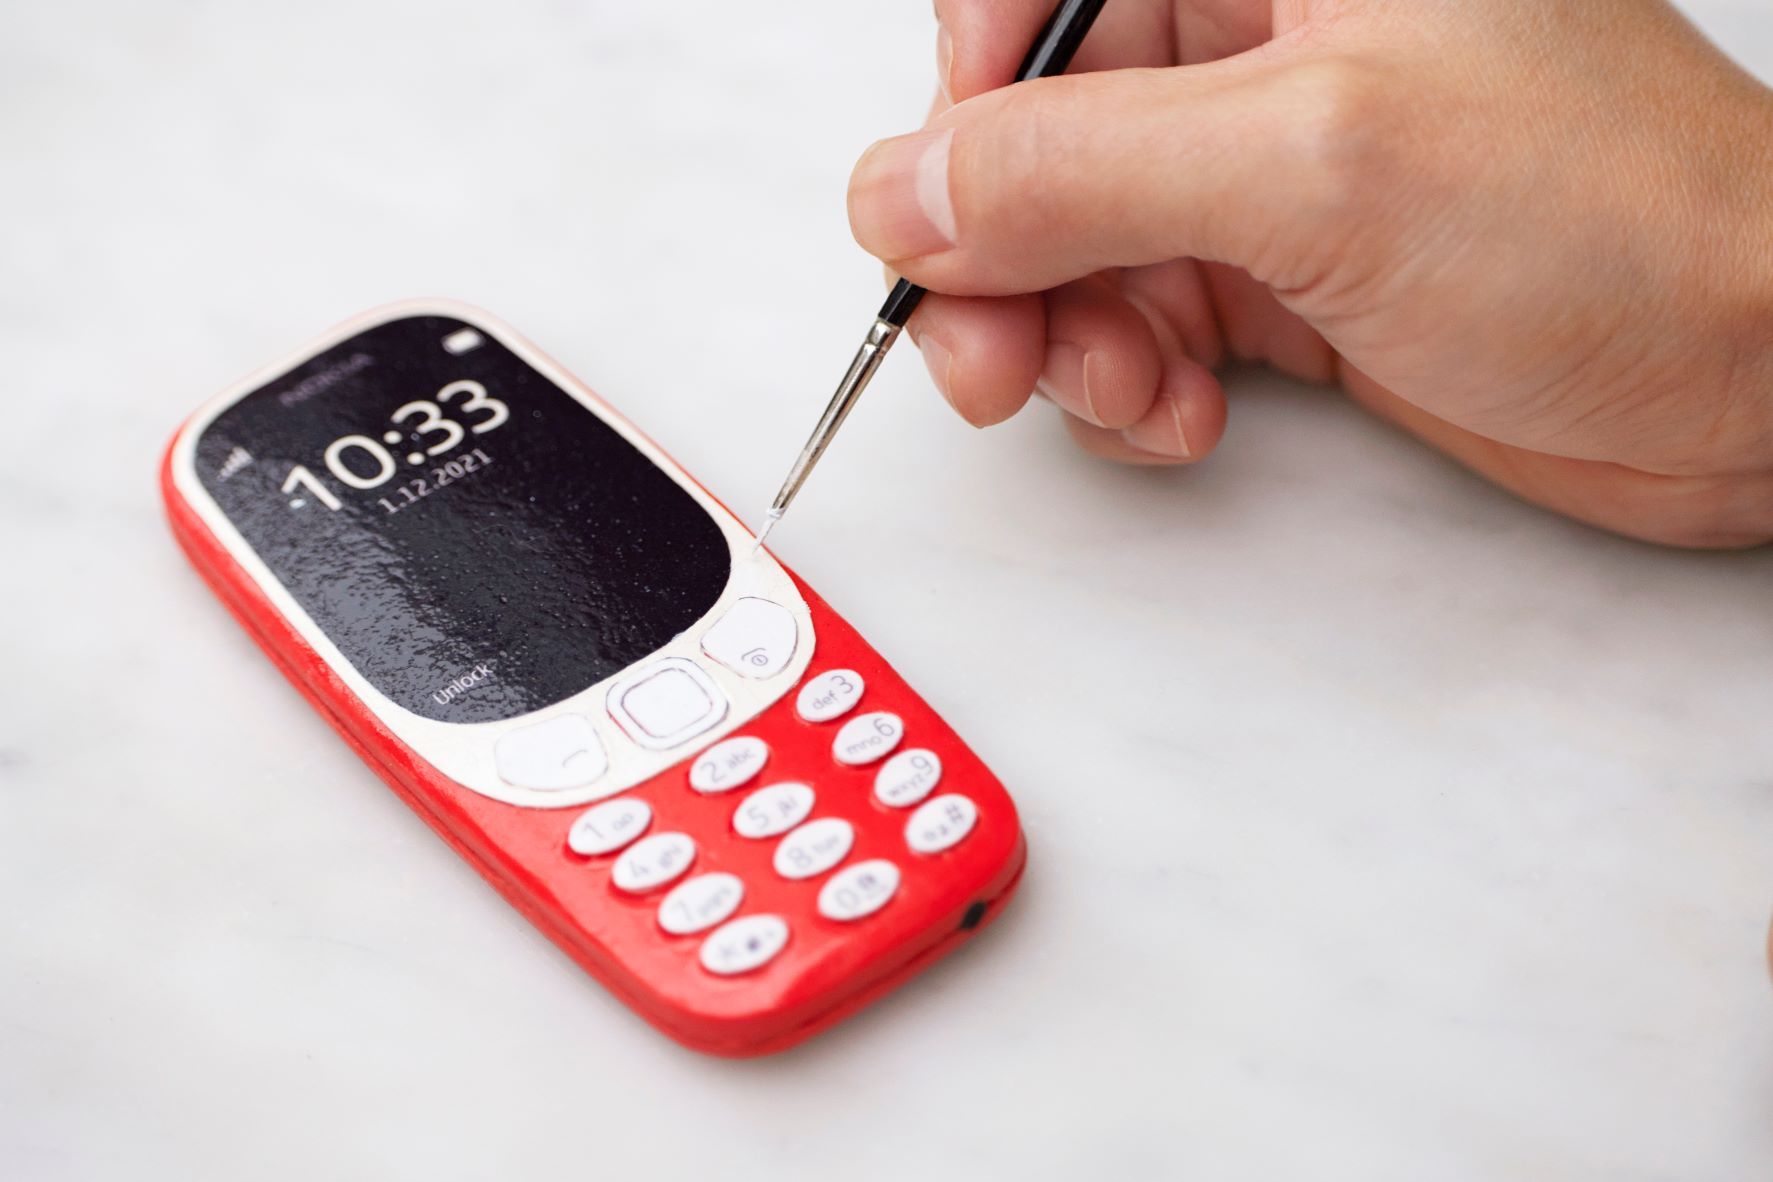 HMD, the home of Nokia phones, celebrates its fifth birthday with a Nokia 3310 cake